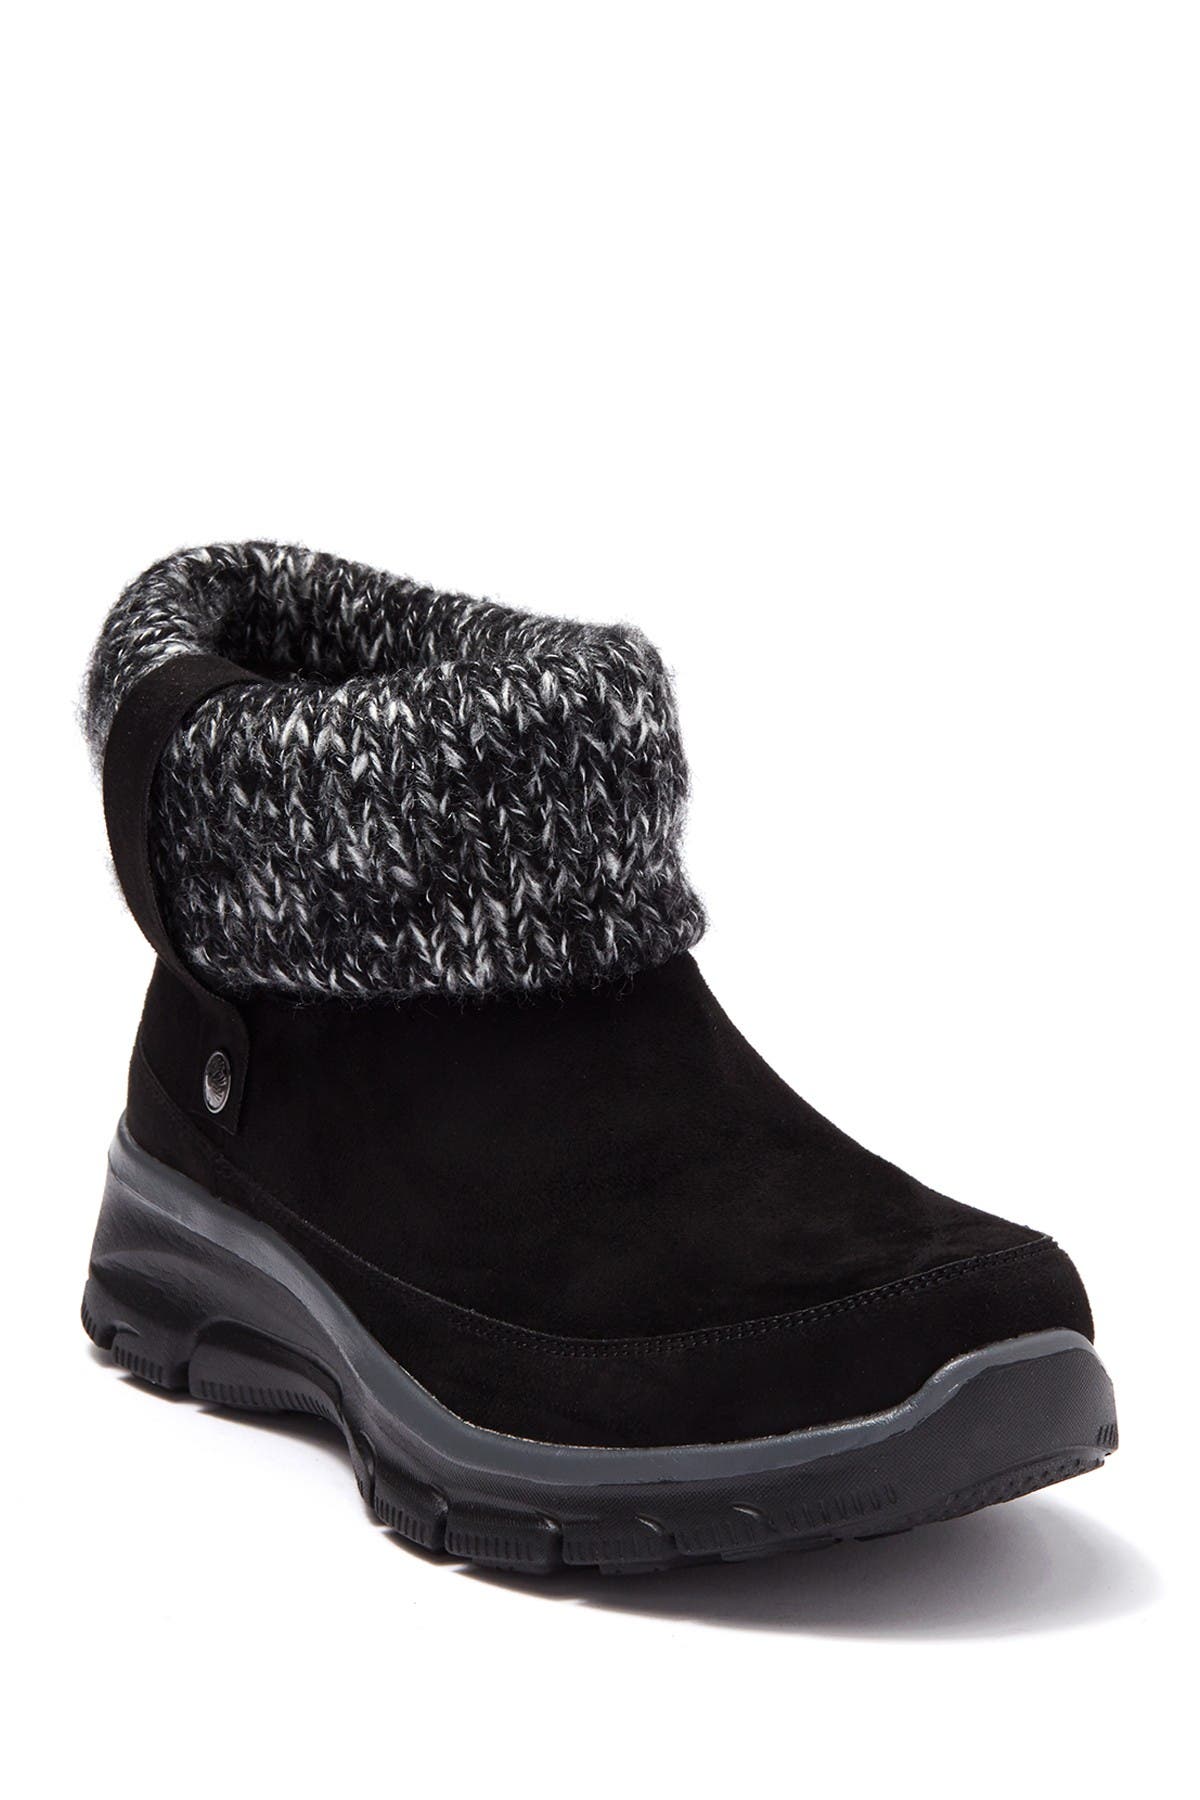 skechers knitted ankle boots